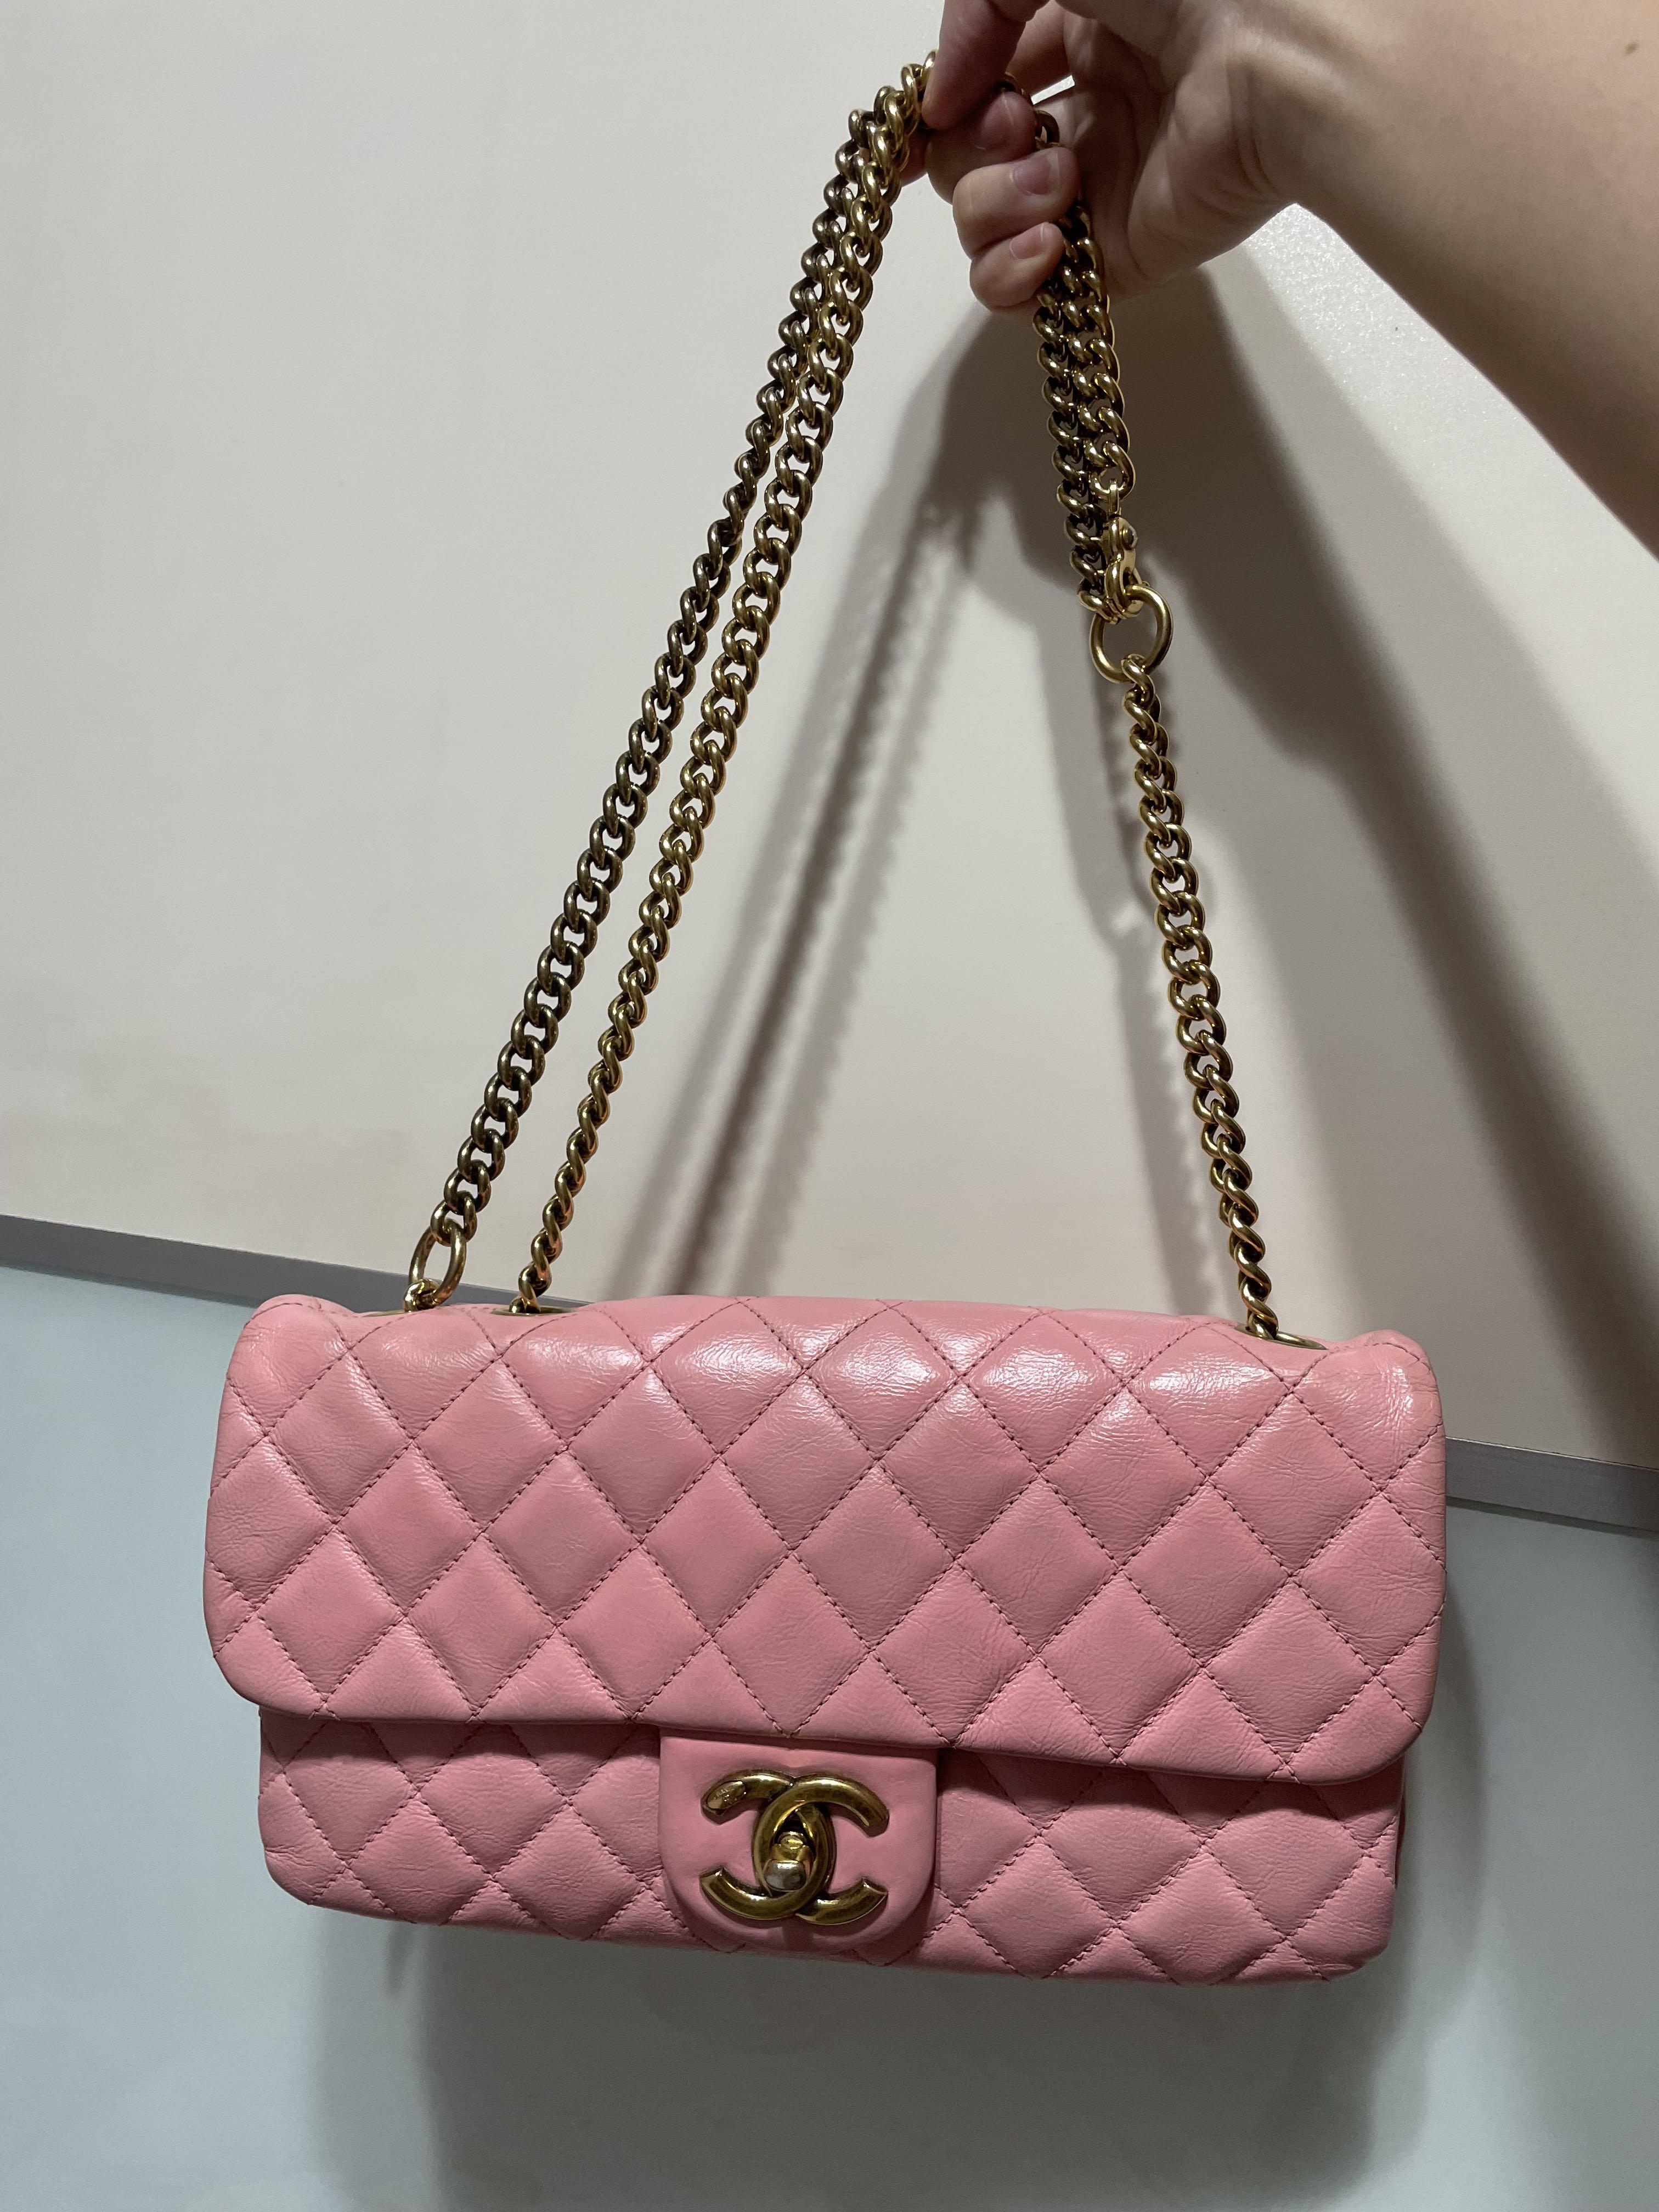 Speechless over this pink chanel bag #pinkchanelbag